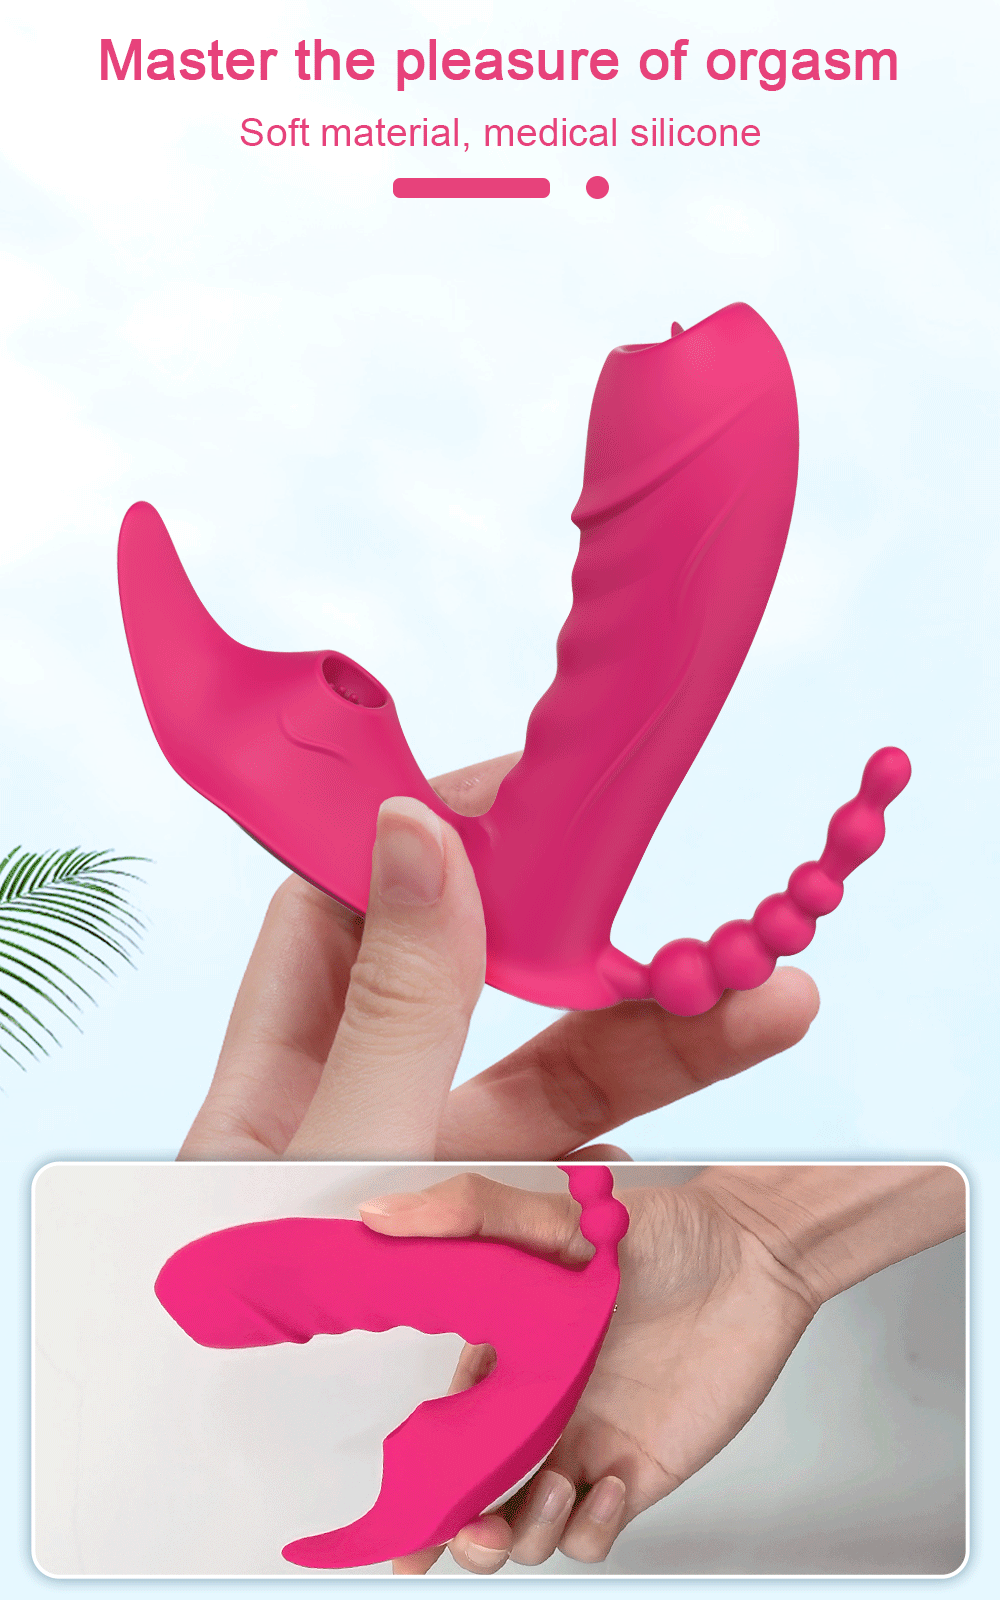 Clit Sucker With G Spot Dildo sofe material medical silicone